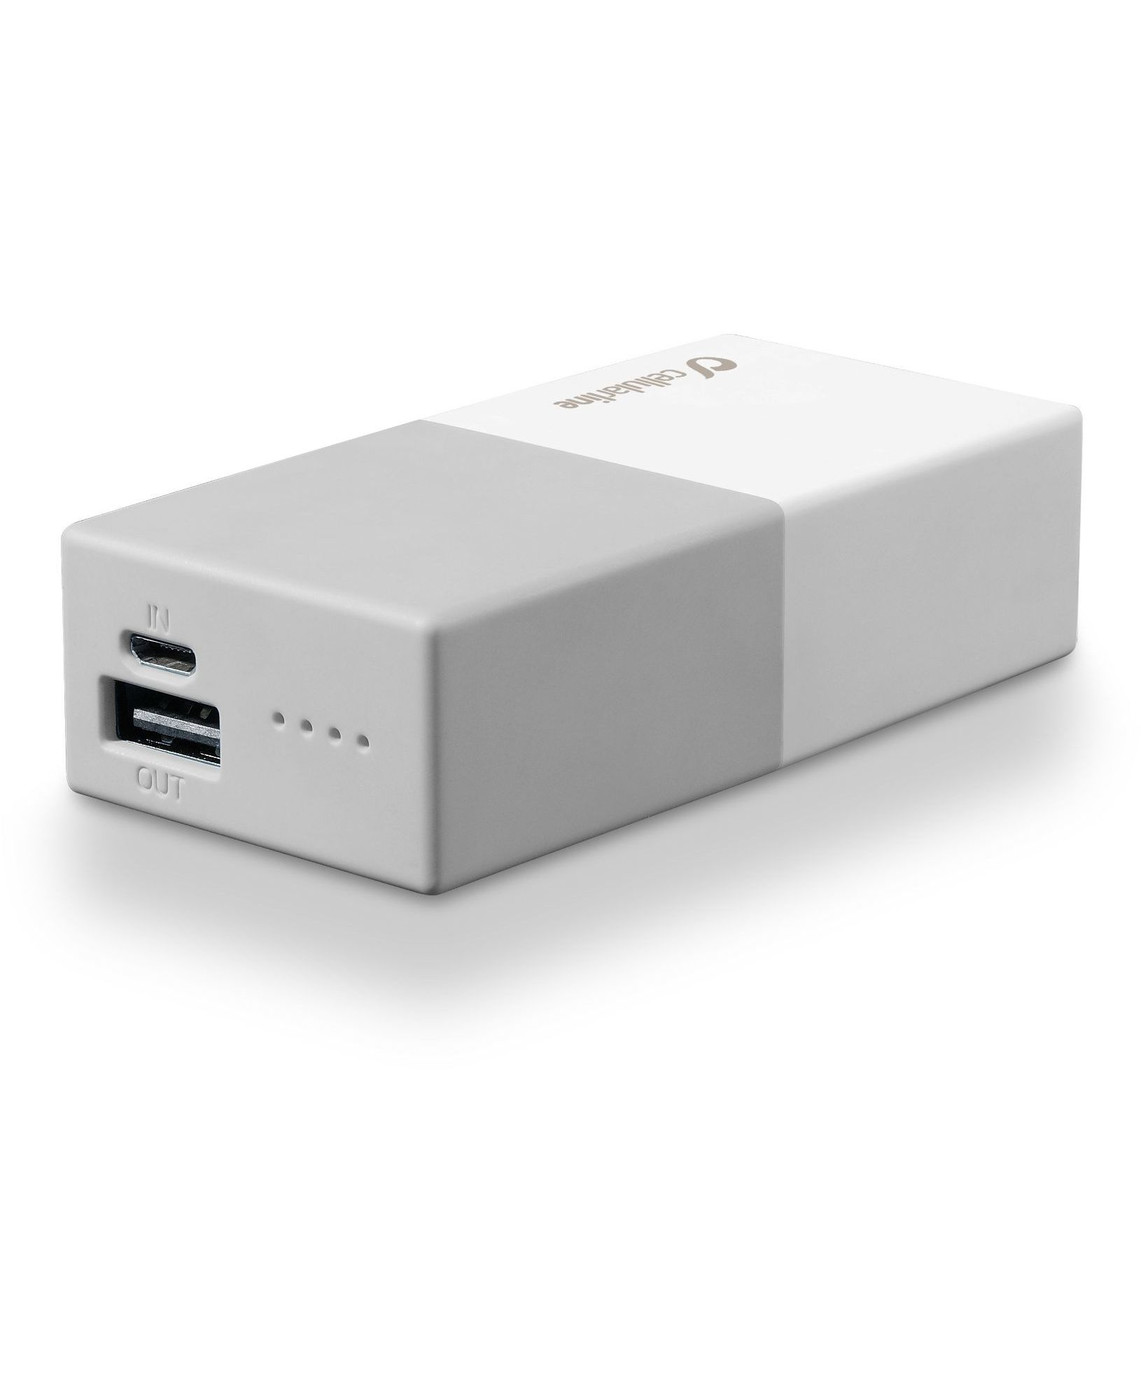 Image of Powerbank 5000 Universal Cellularline 1 Caricabatterie Bianco